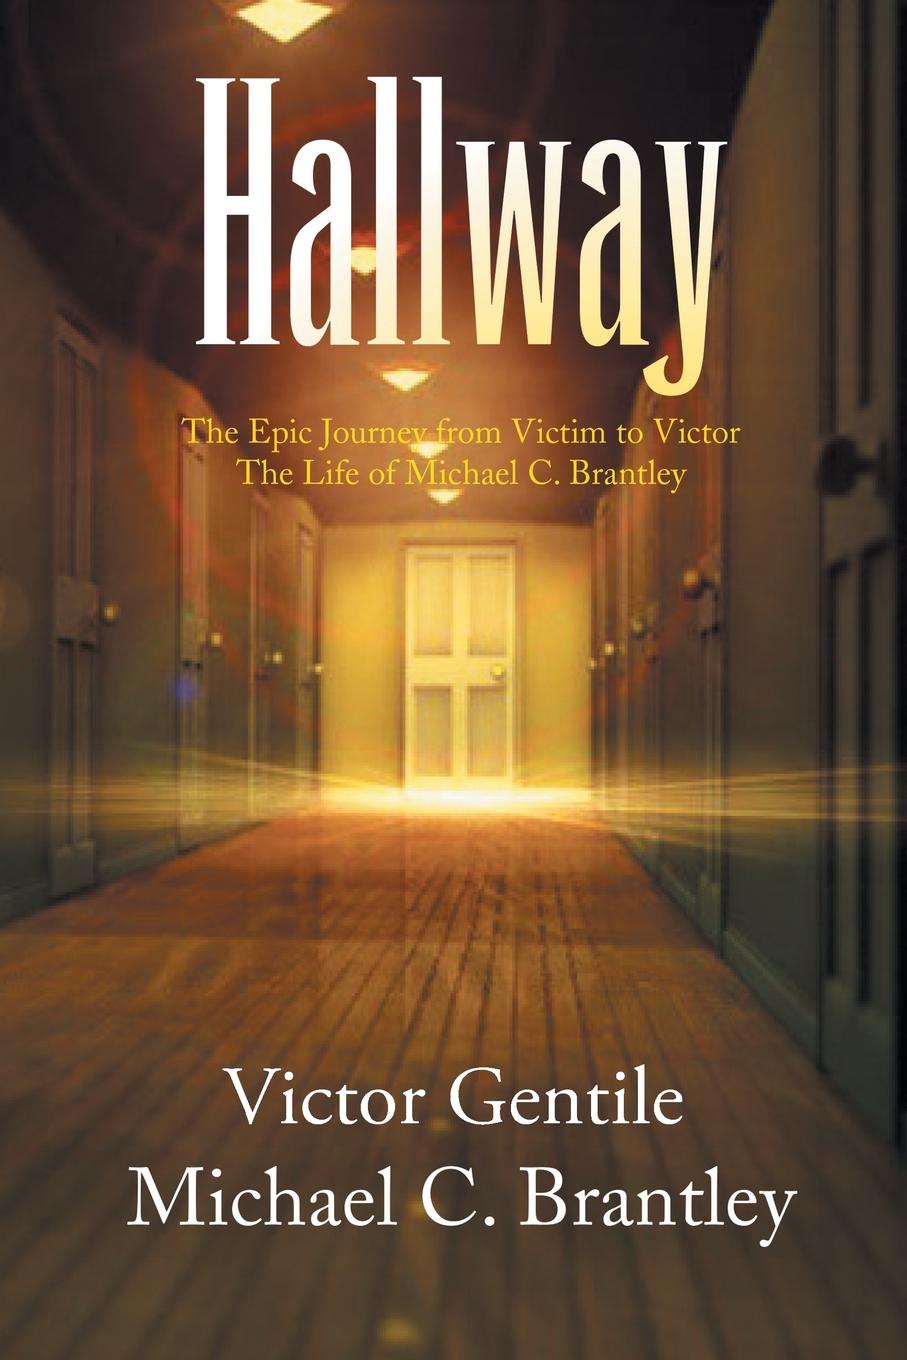 Hallway. The Epic Journey from Victim to Victor the Life of Michael C. Brantley